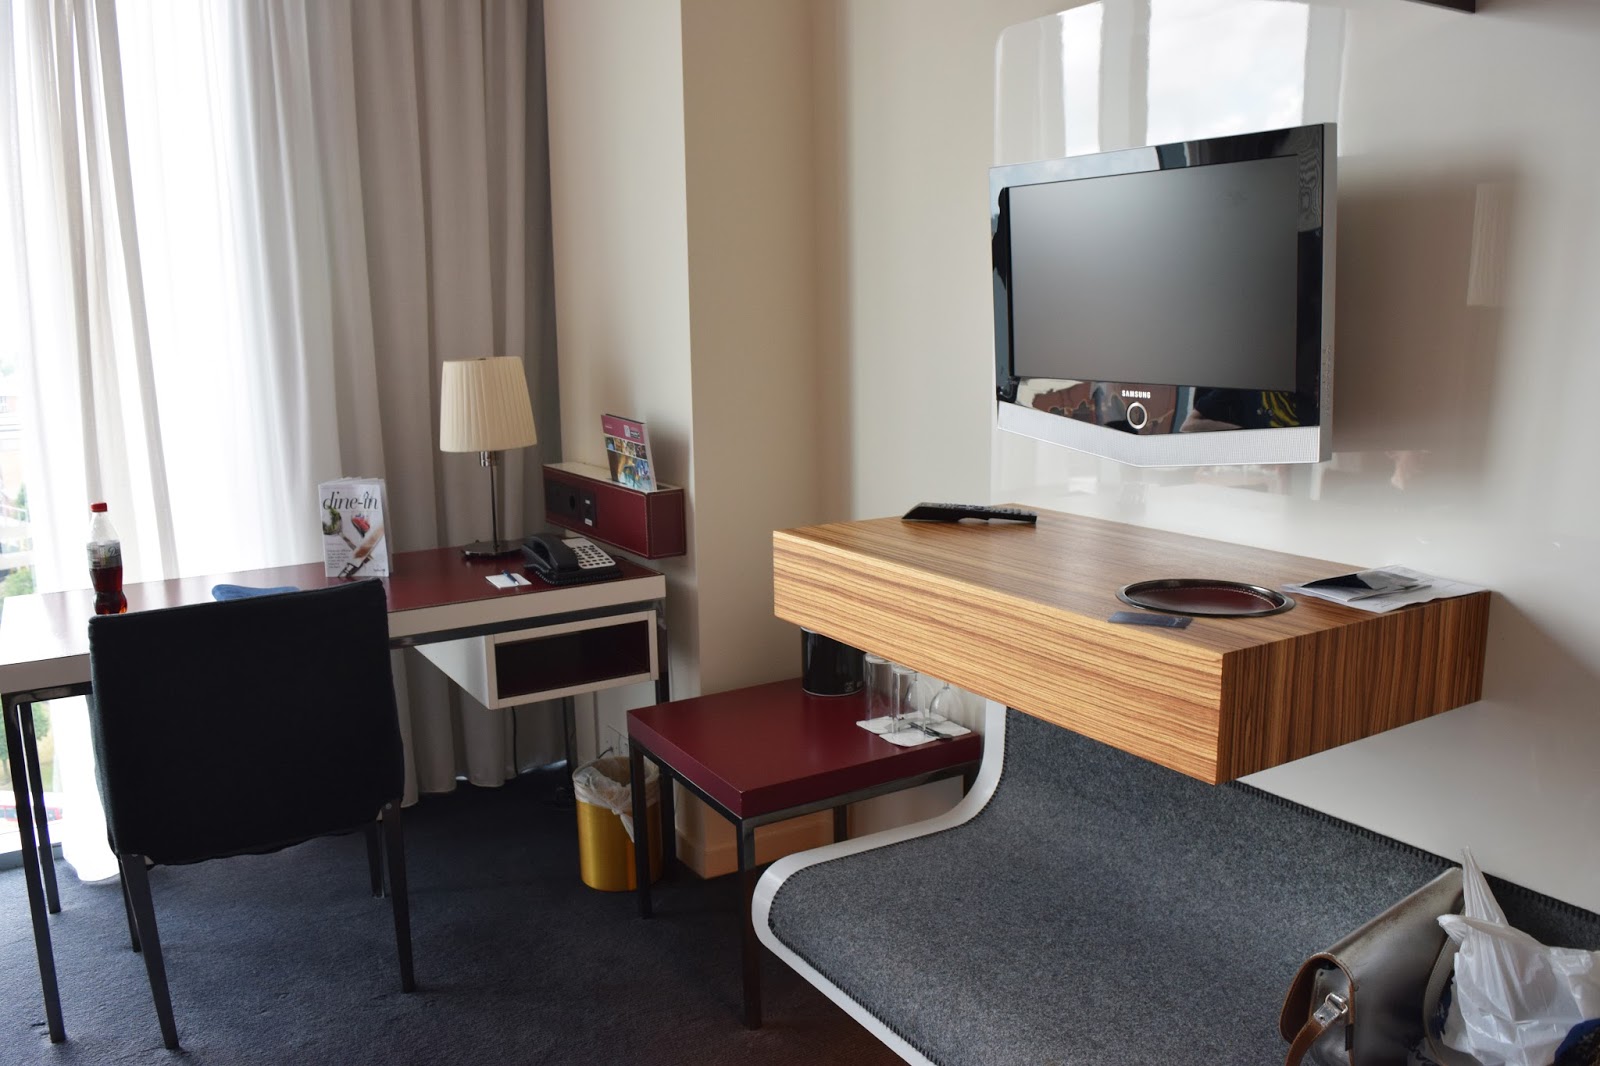 another view of the hotel room, focusing on the desk area and wall mounted tv